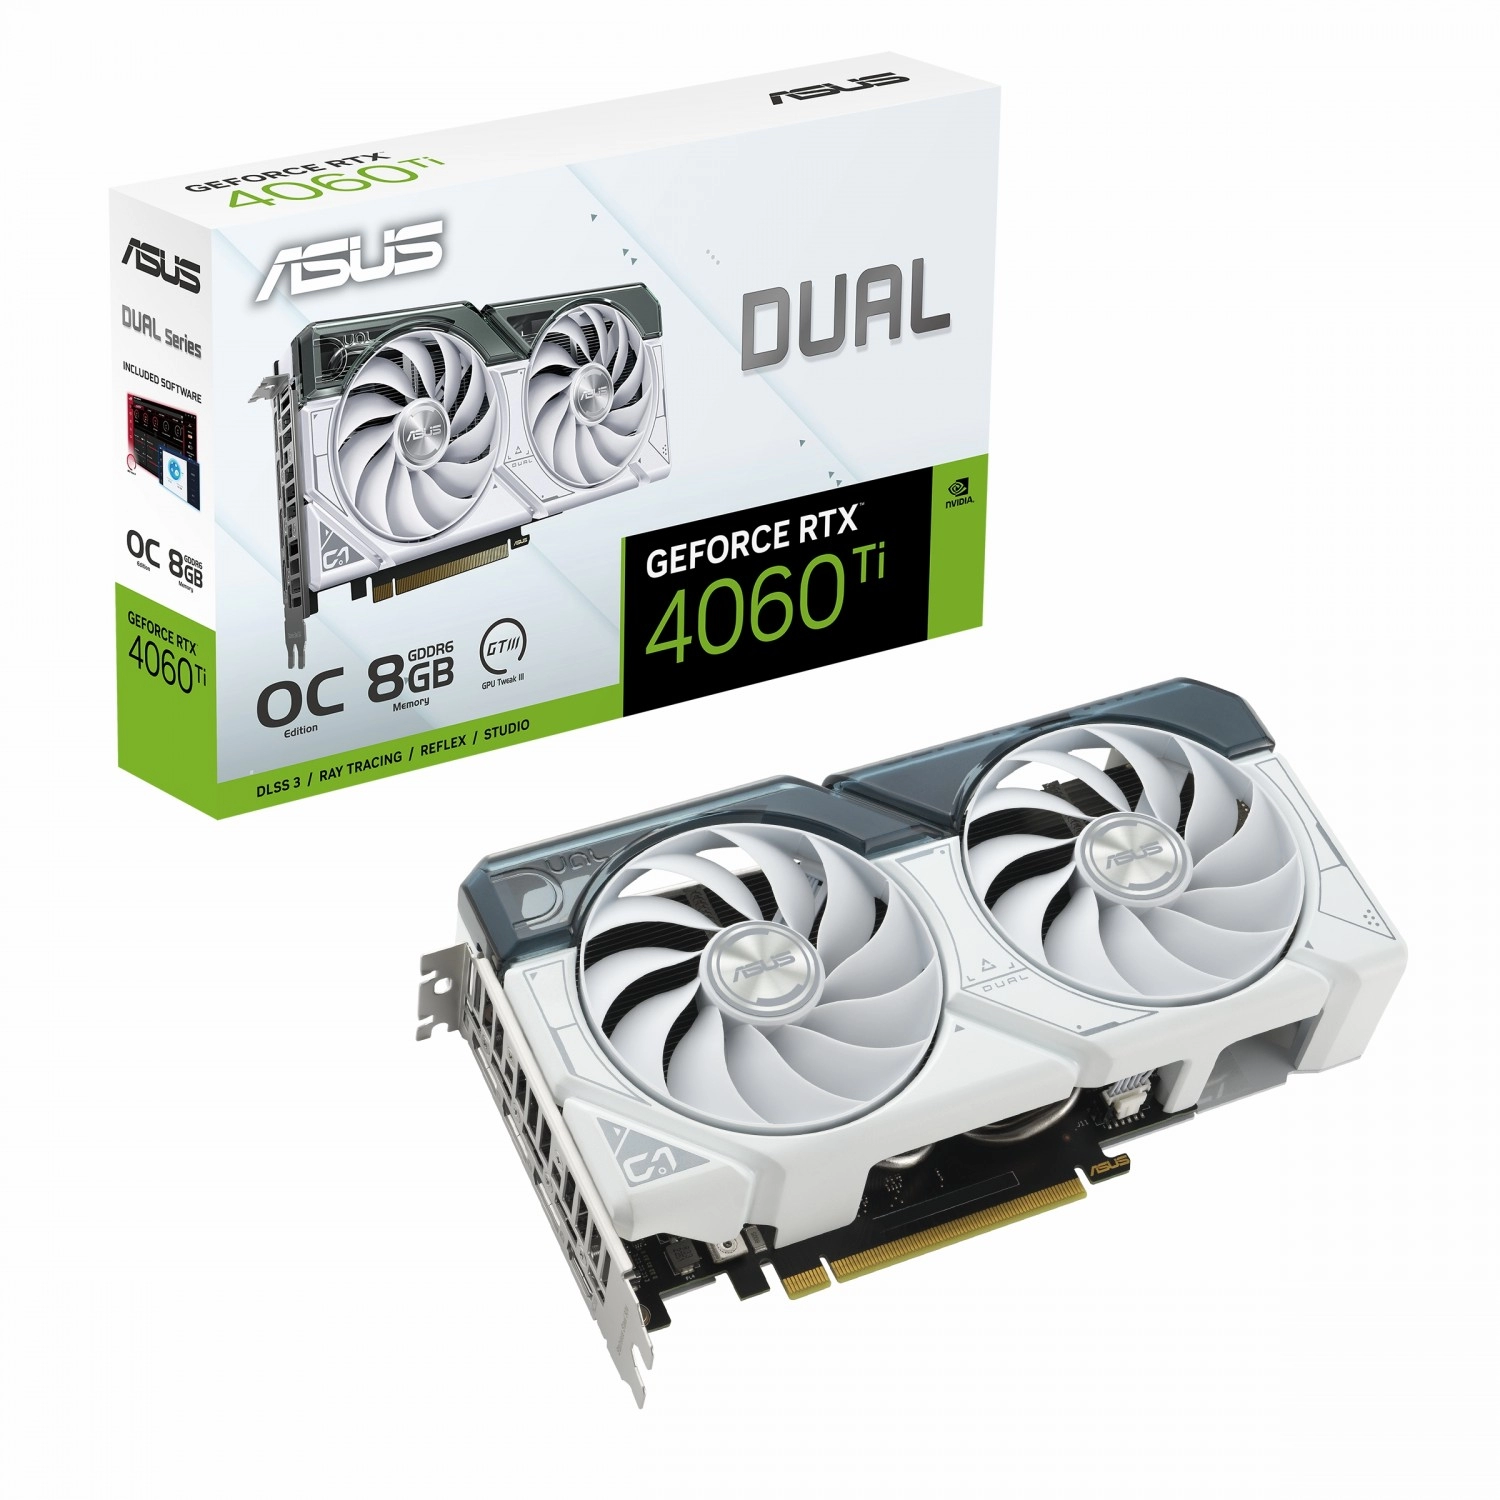 ASUS Dual GeForce RTX 4060 Ti White OC 8GB Package